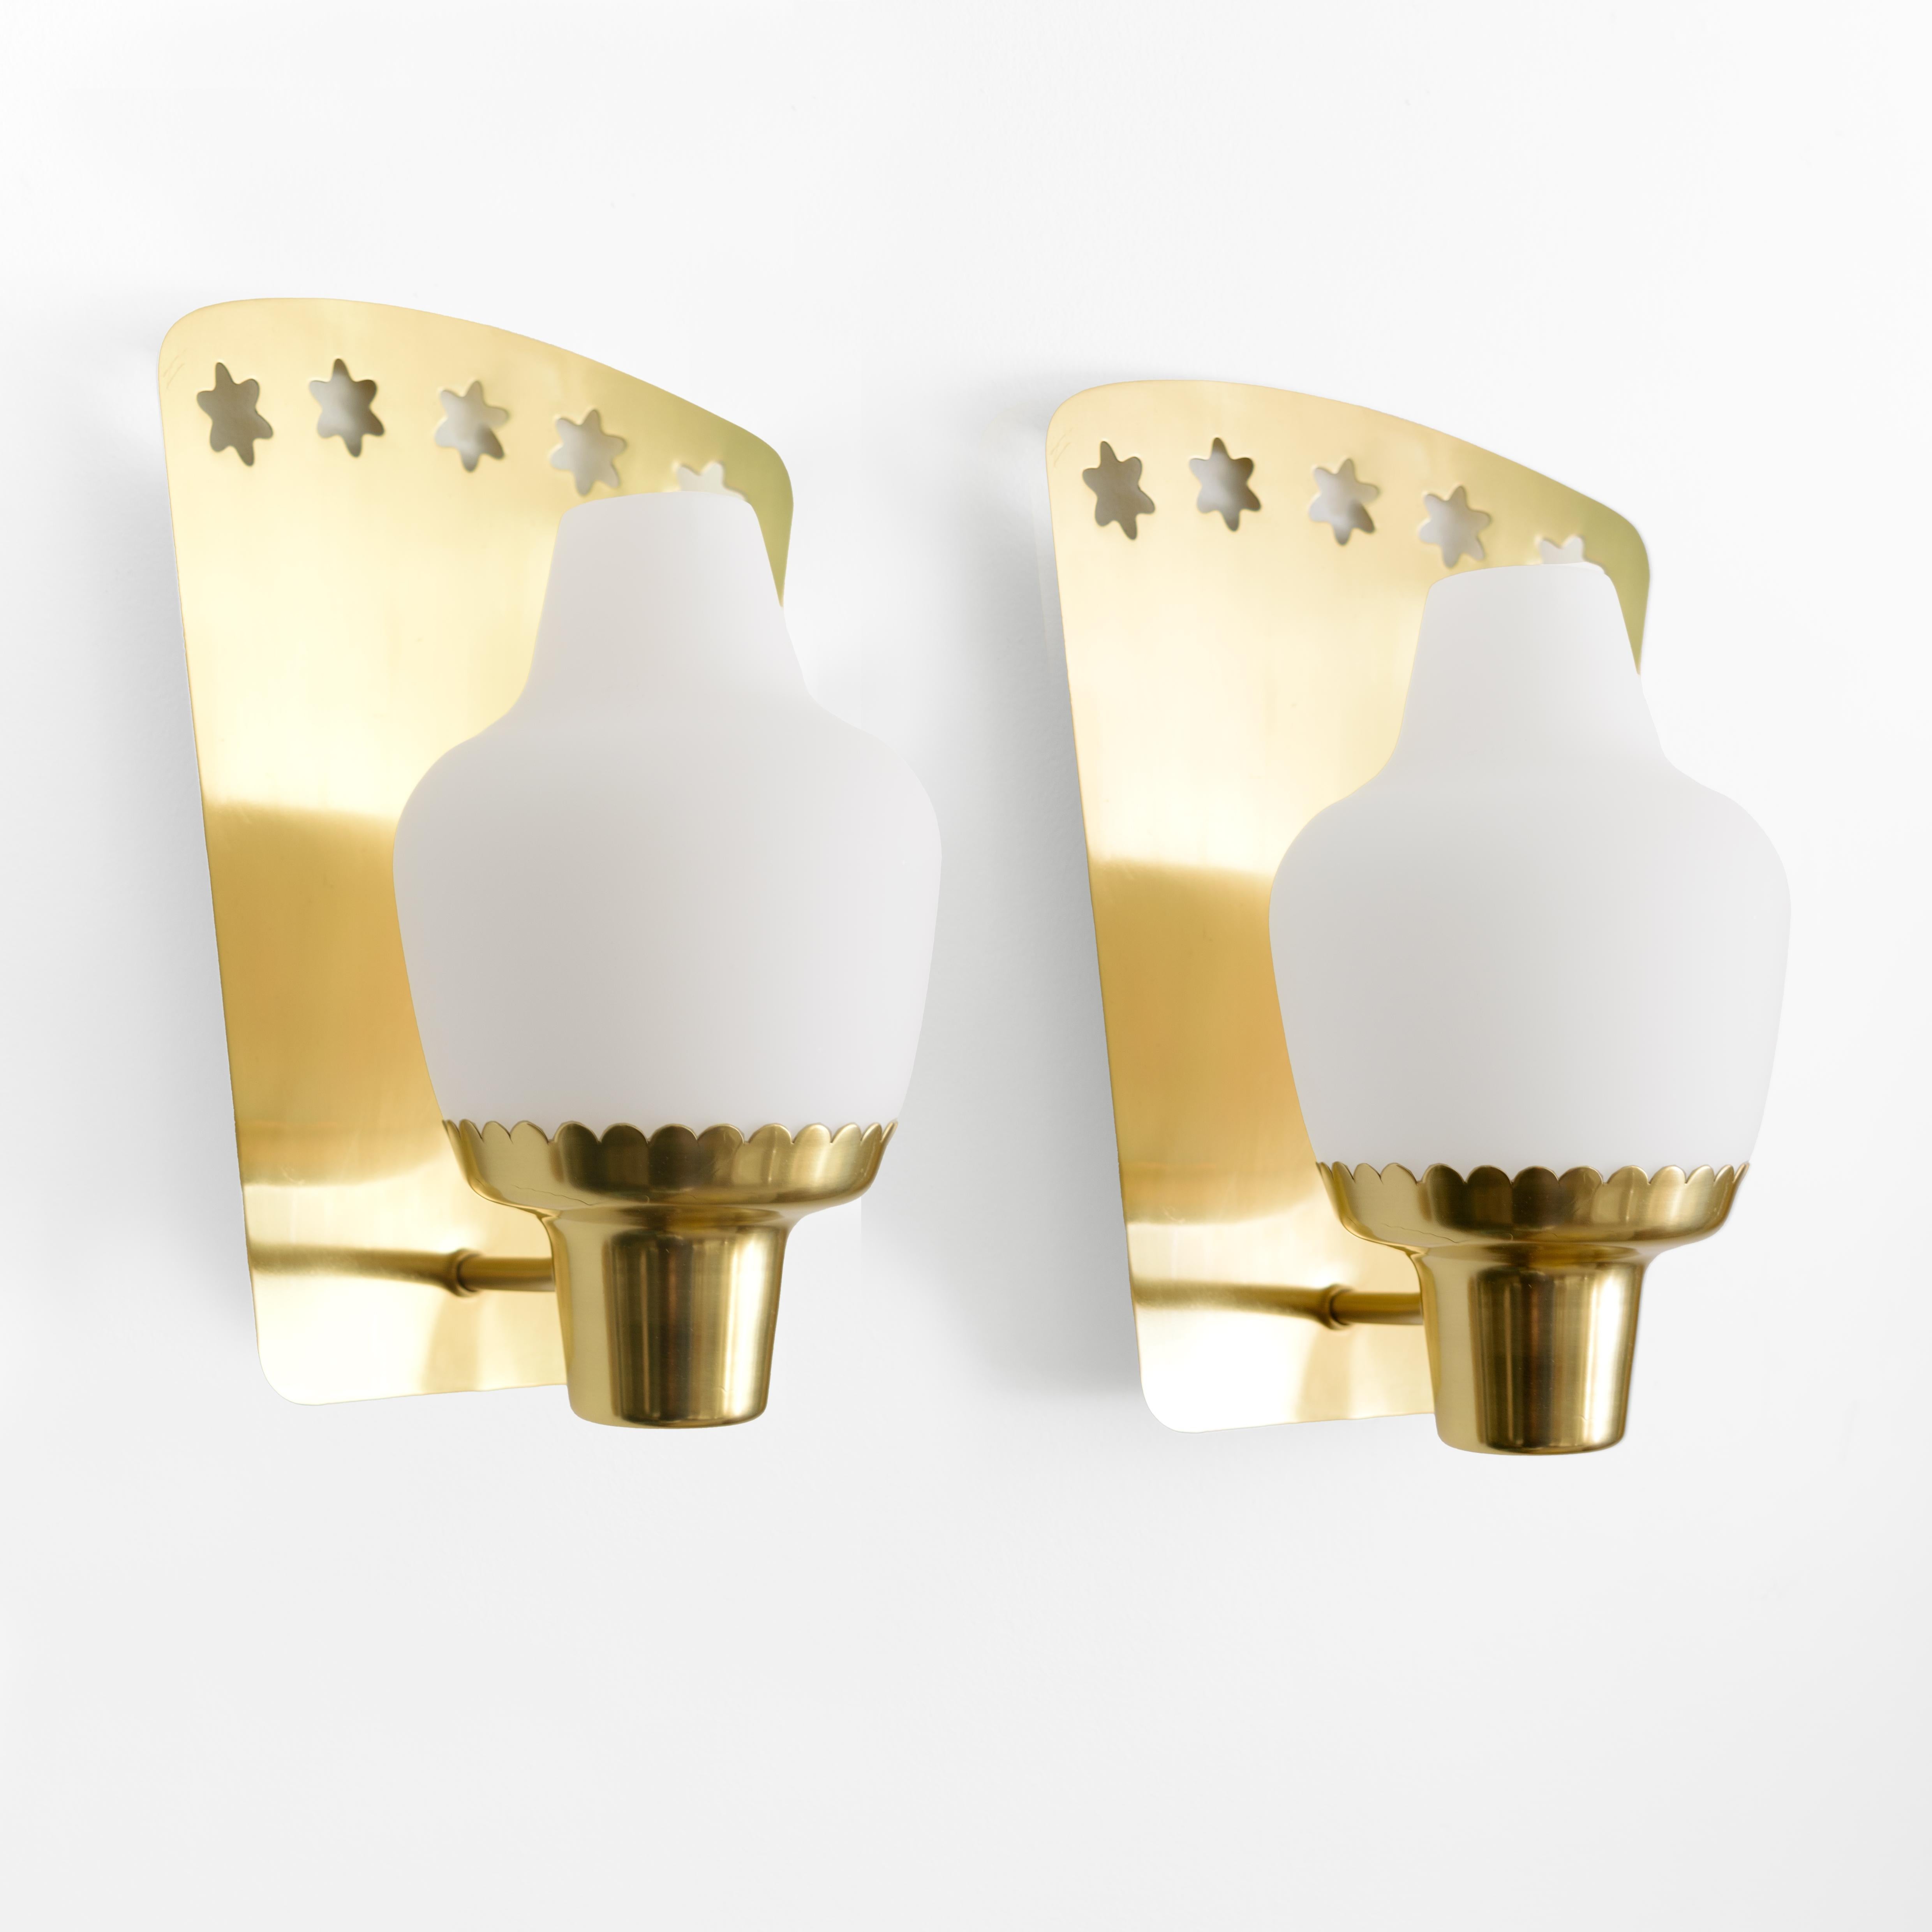 Pair of Scandinavian Modern wall sconces in polished brass designed by Hans Bergström for Ateljé Lyktan, Sweden circa 1950. The backplates are curved bodies with five cutouts with 6 points. Each has an arm with ends with a scallop edge which